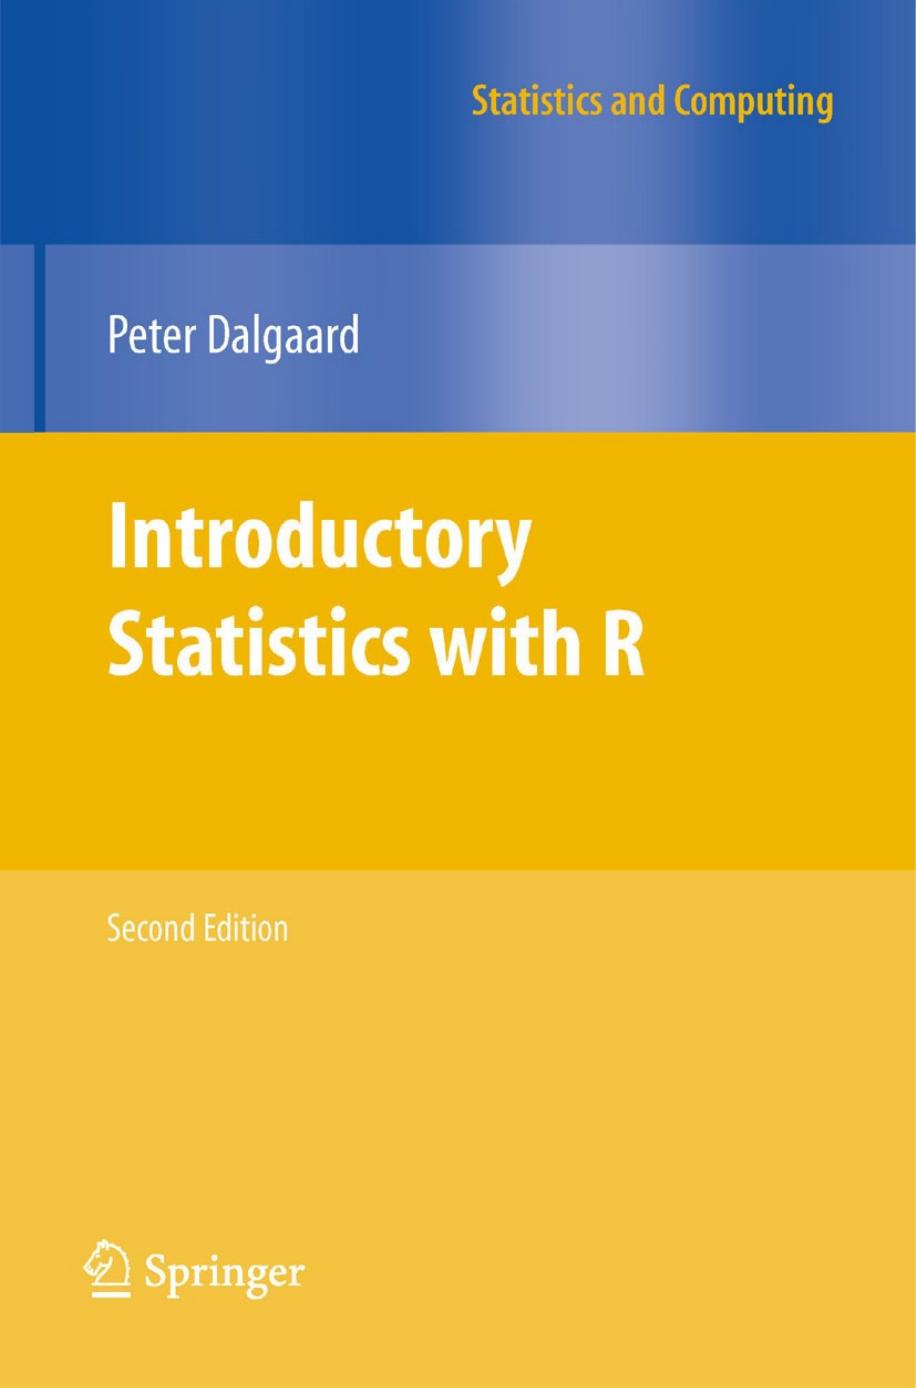 Book IntroductoryStatisticsWithR 2008